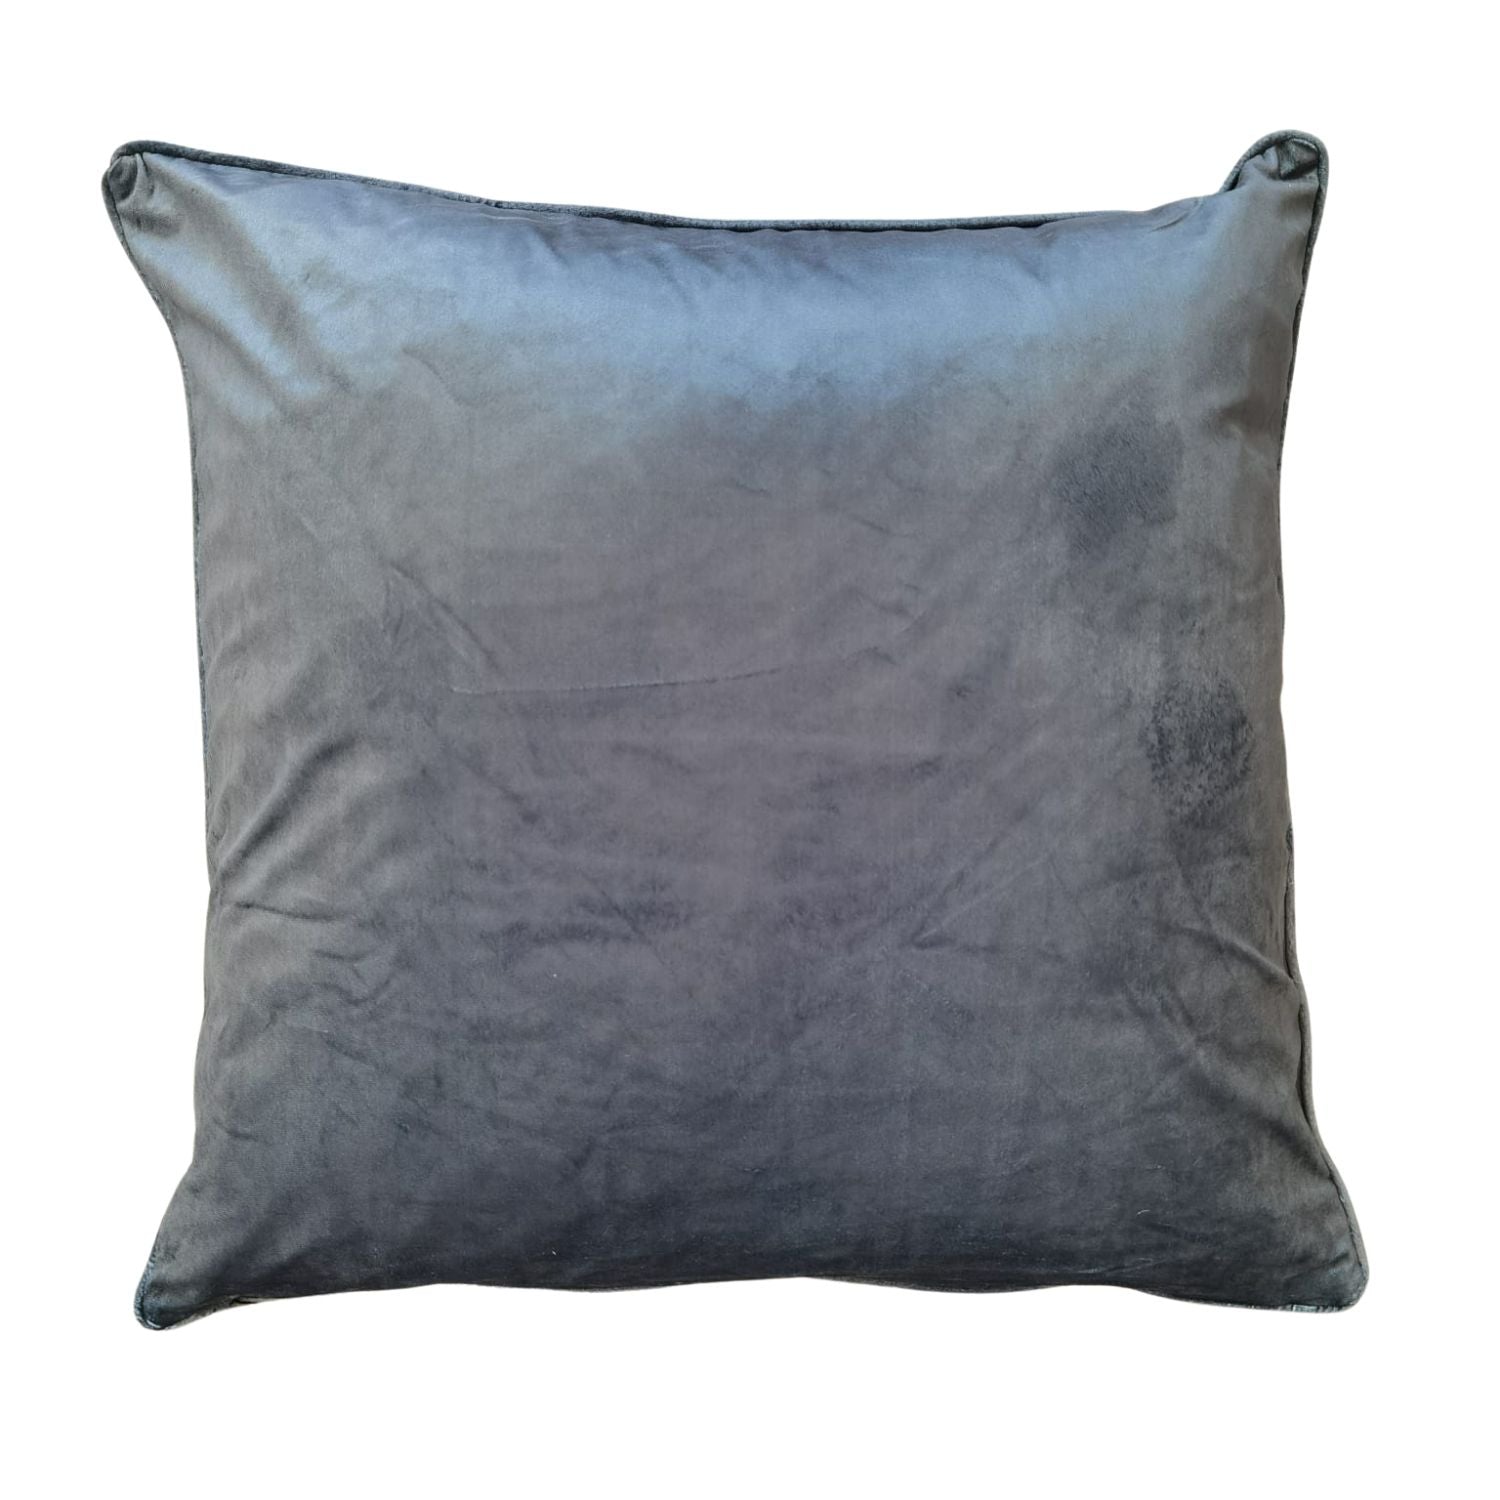 The Home Living Room Printed Piped Cushion Cover - 24x24&